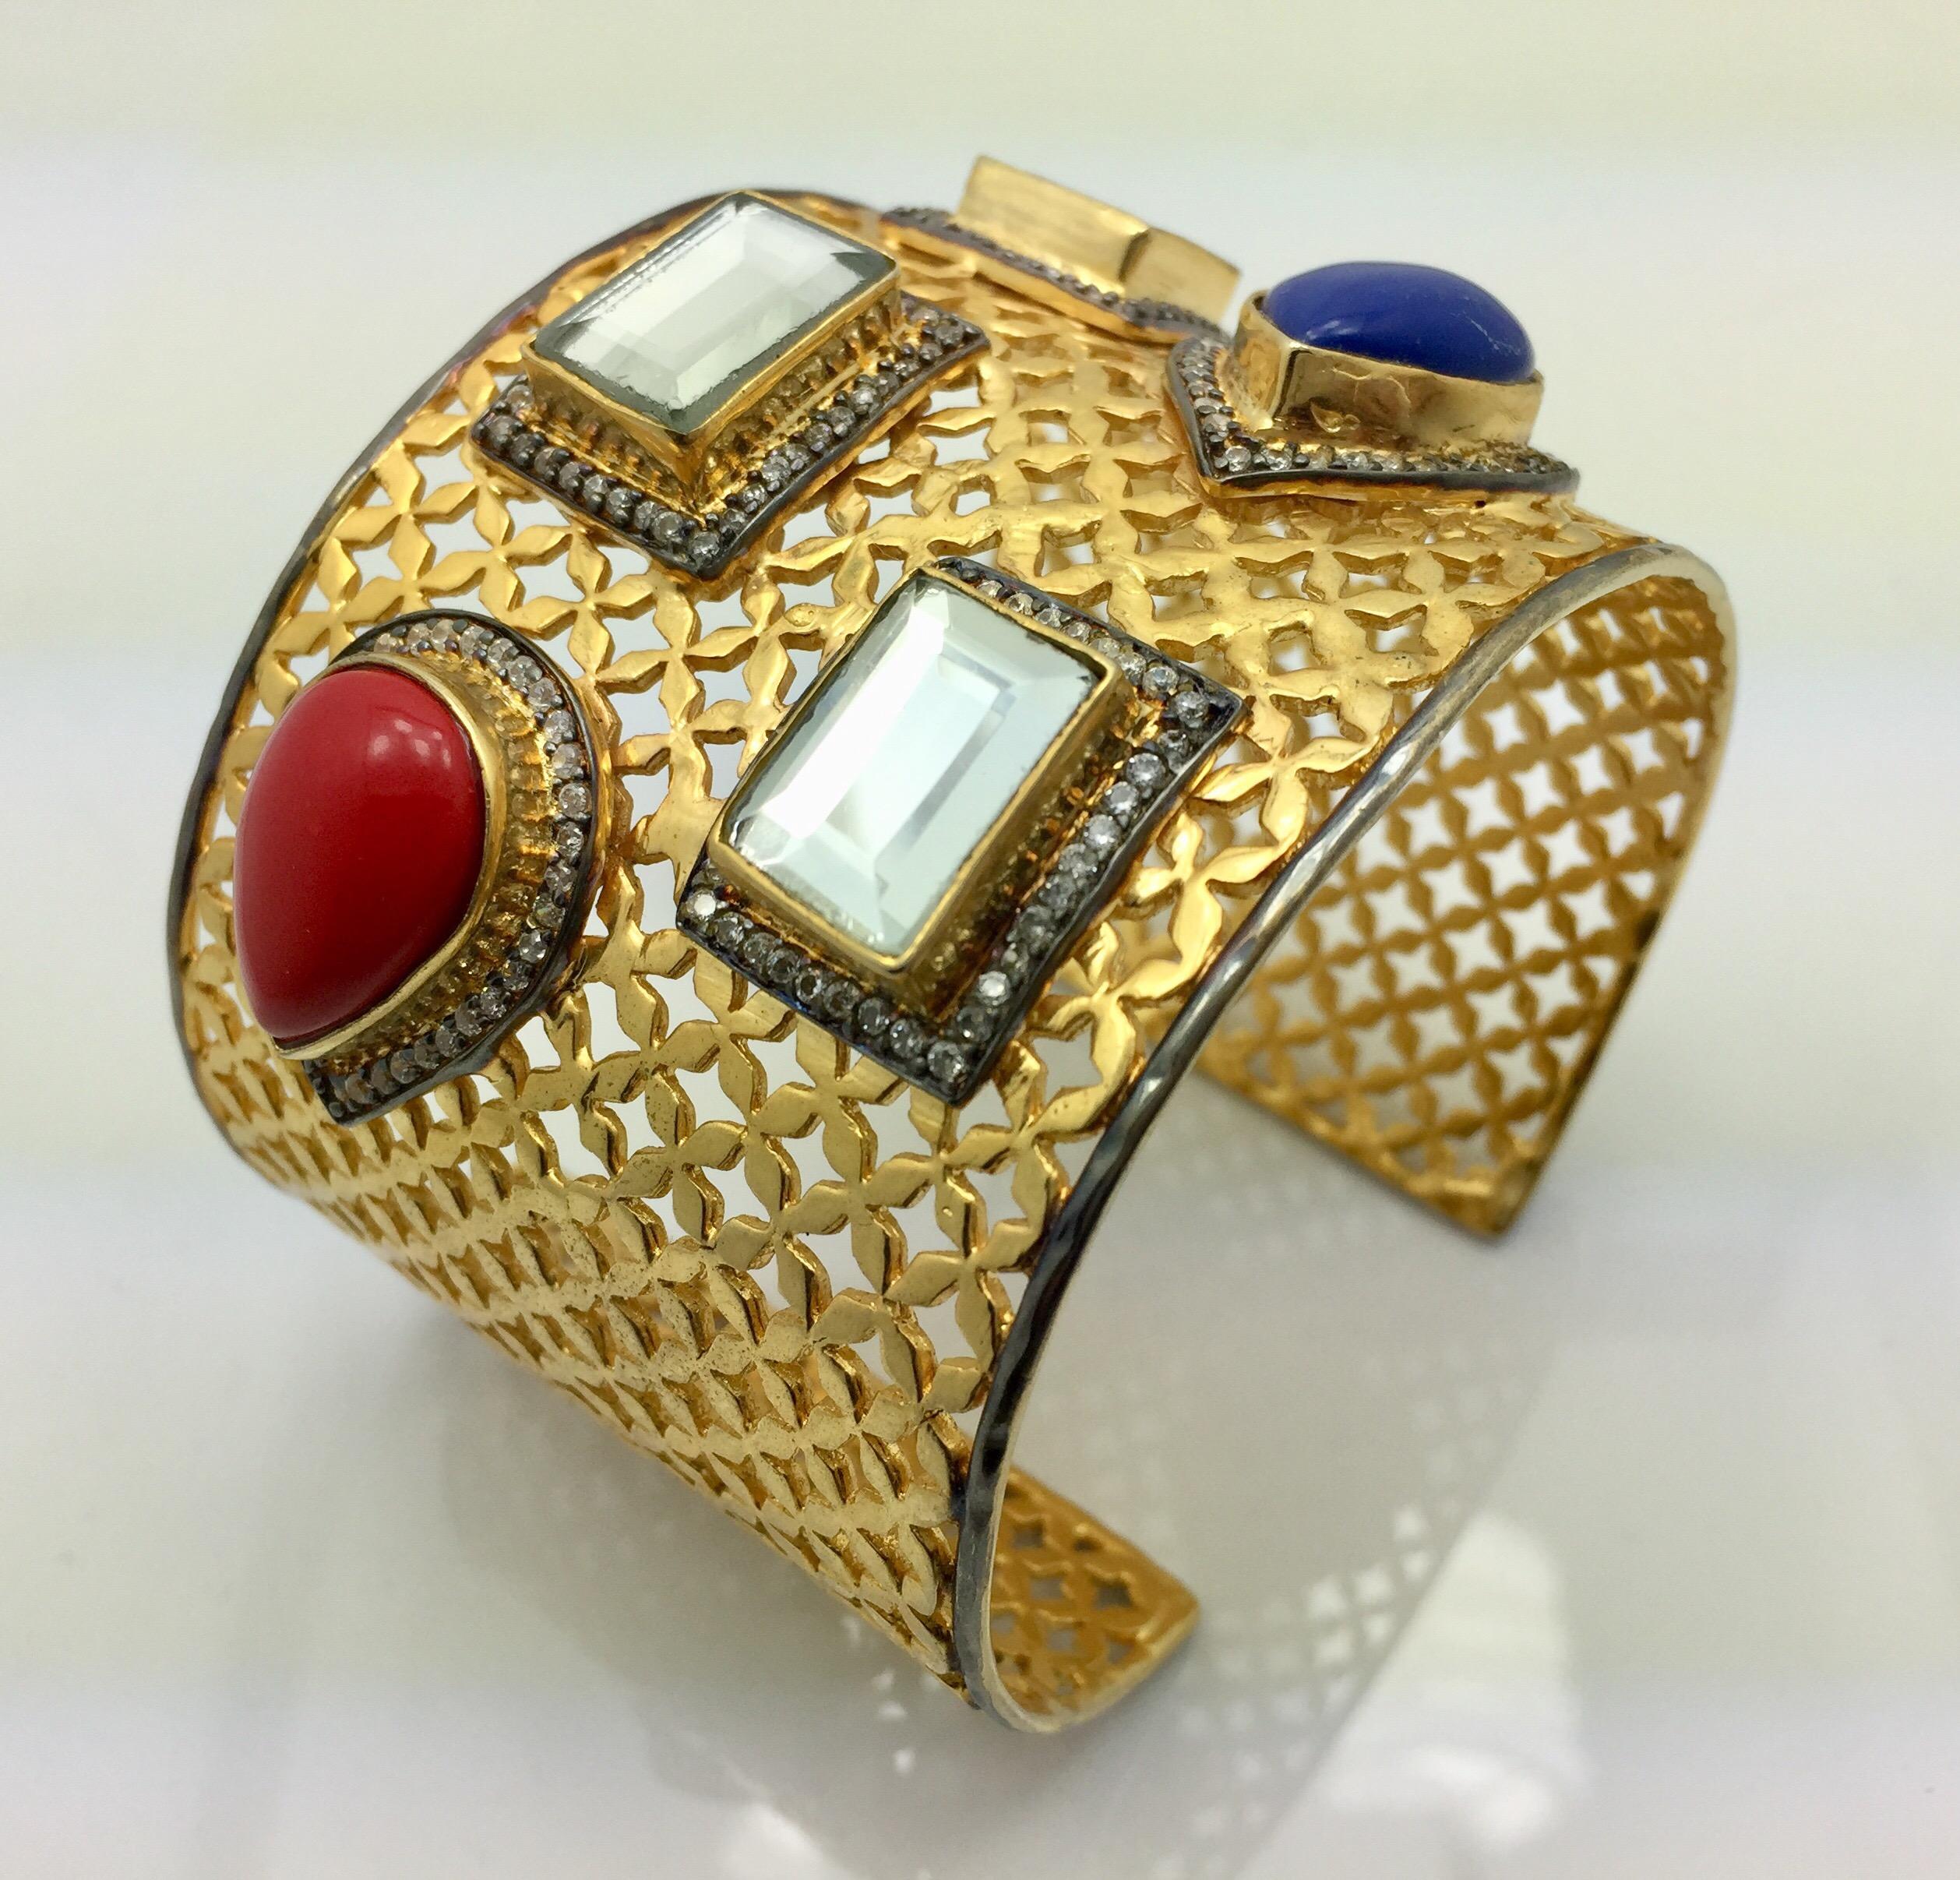 A gold lattice frame with light reflecting mirror polki stones becomes a gleaming backdrop for the brightly colored blue and red teardrop stones.  The wide cuff is an attention commanding finishing touch you will treasure, and is slightly adjustable